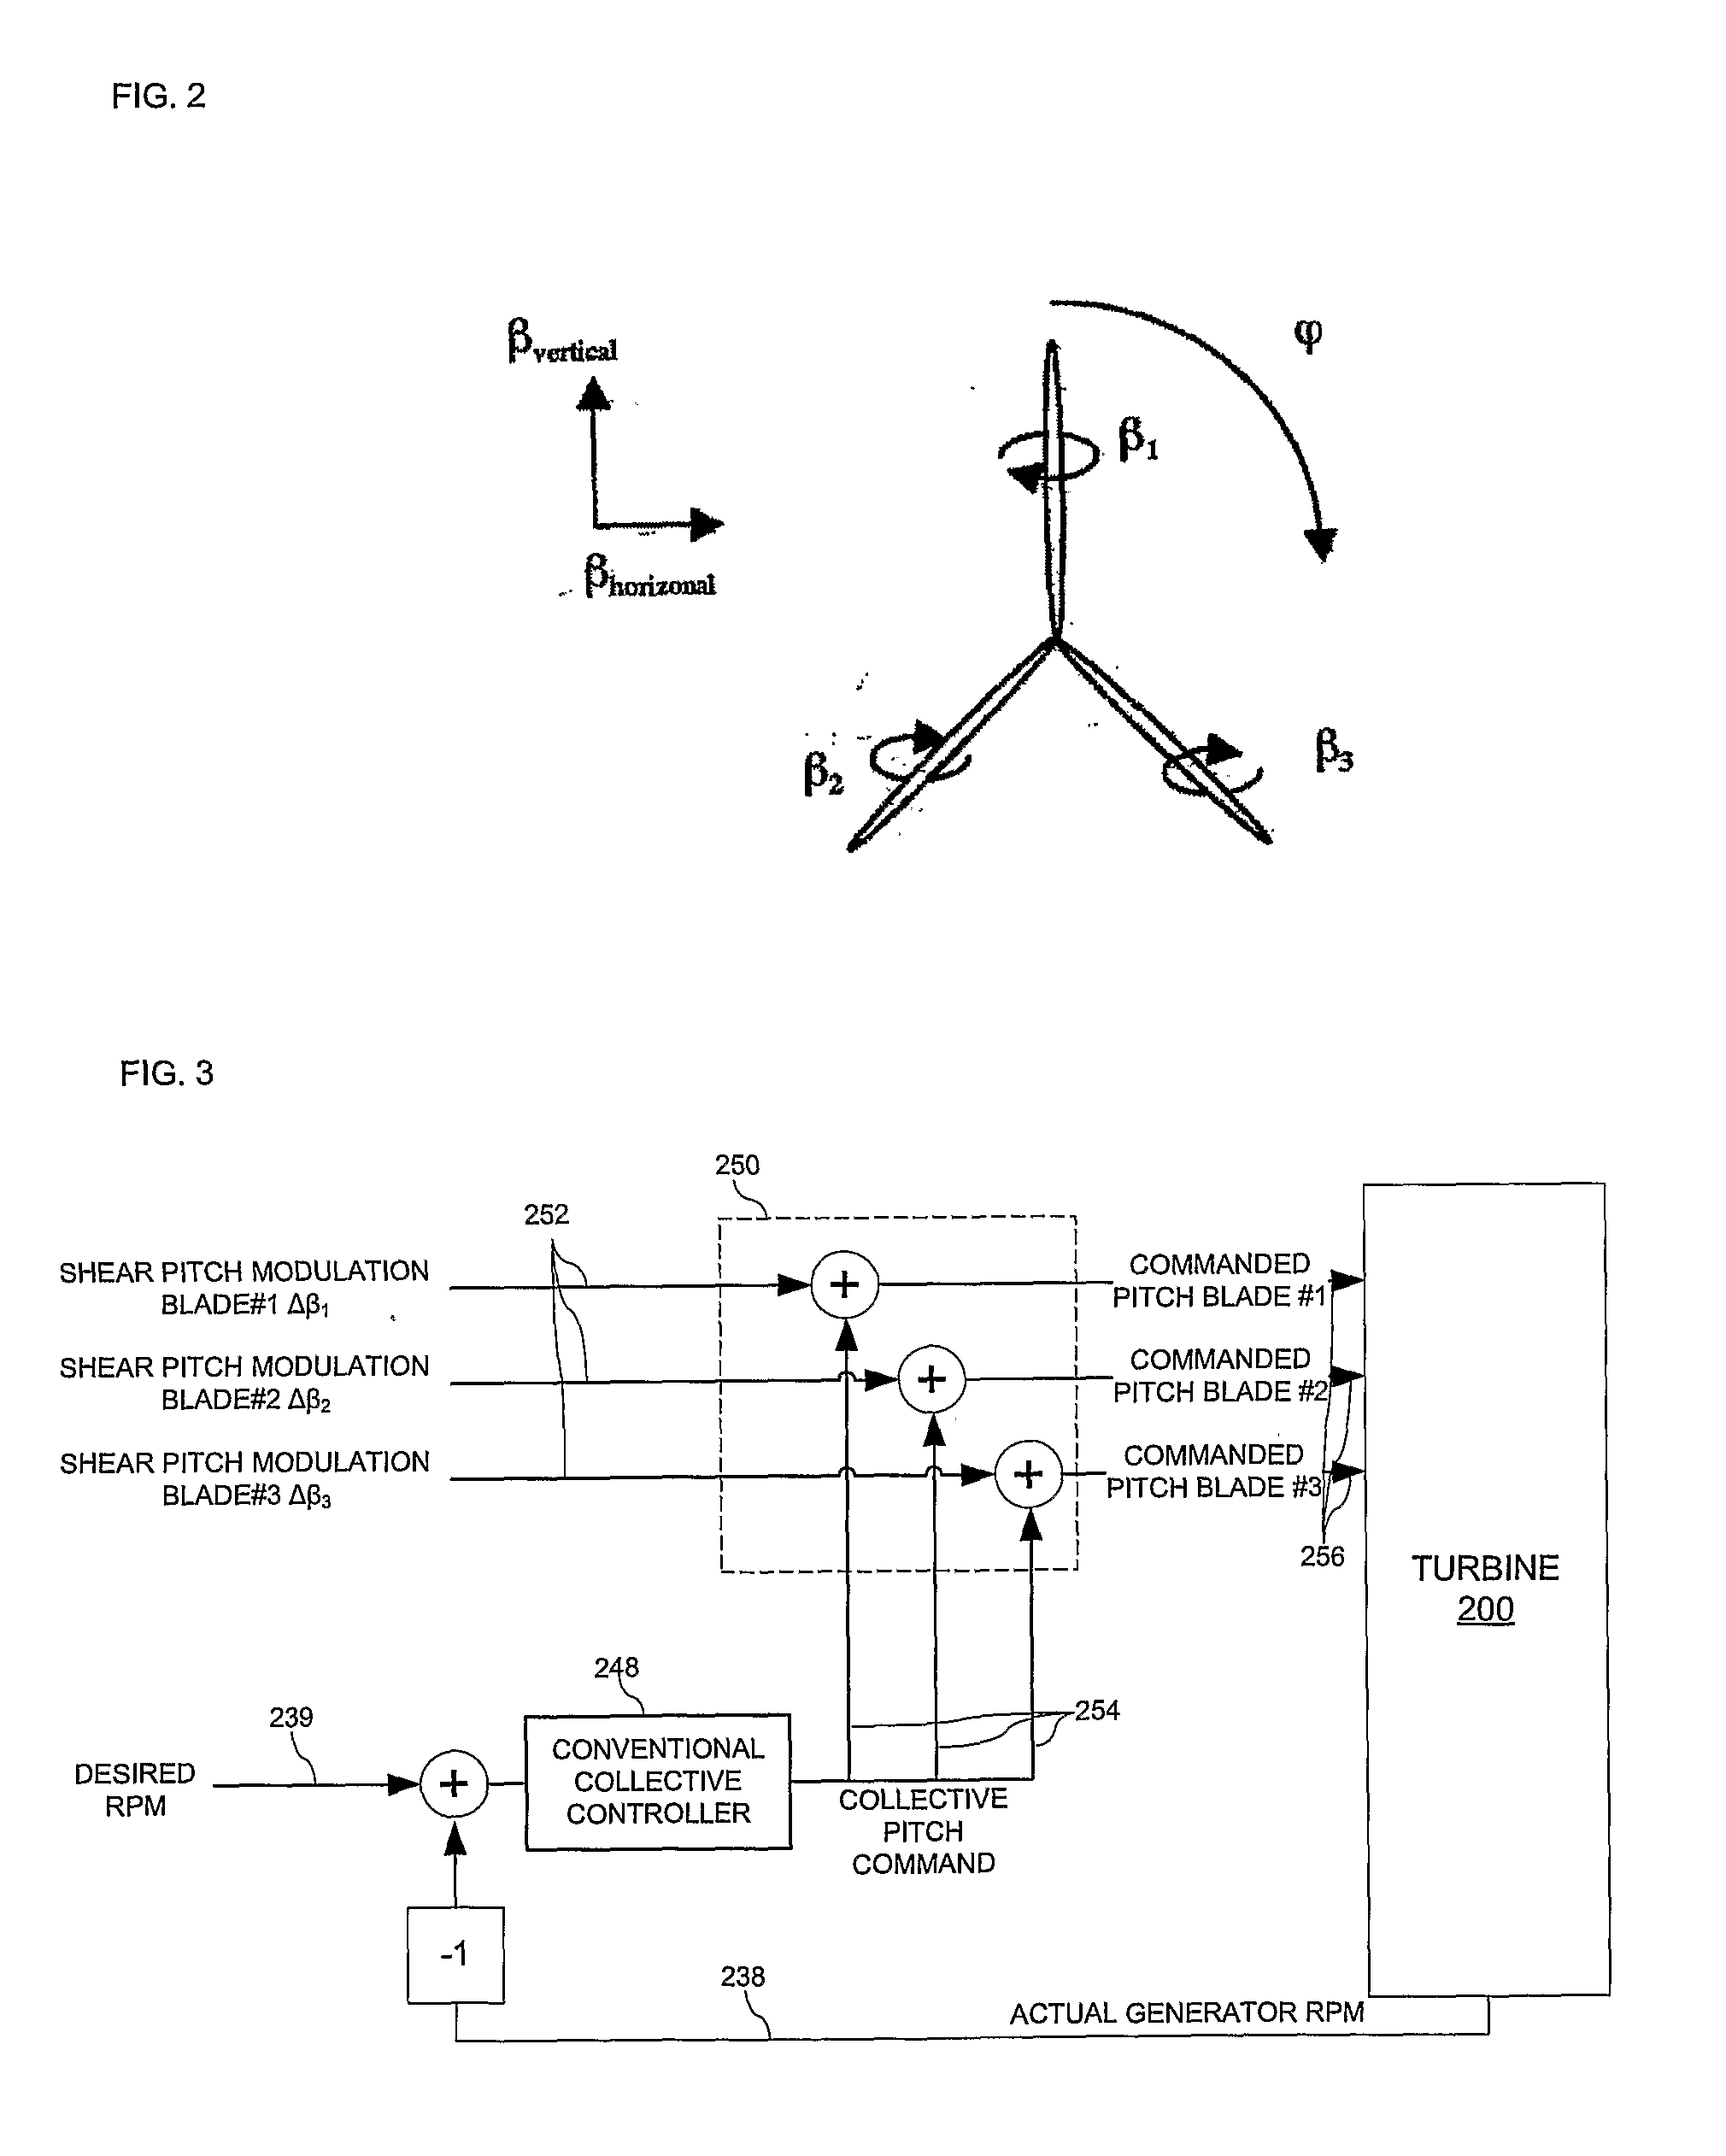 Wind turbine with blade pitch control to compensate for wind shear and wind misalignment